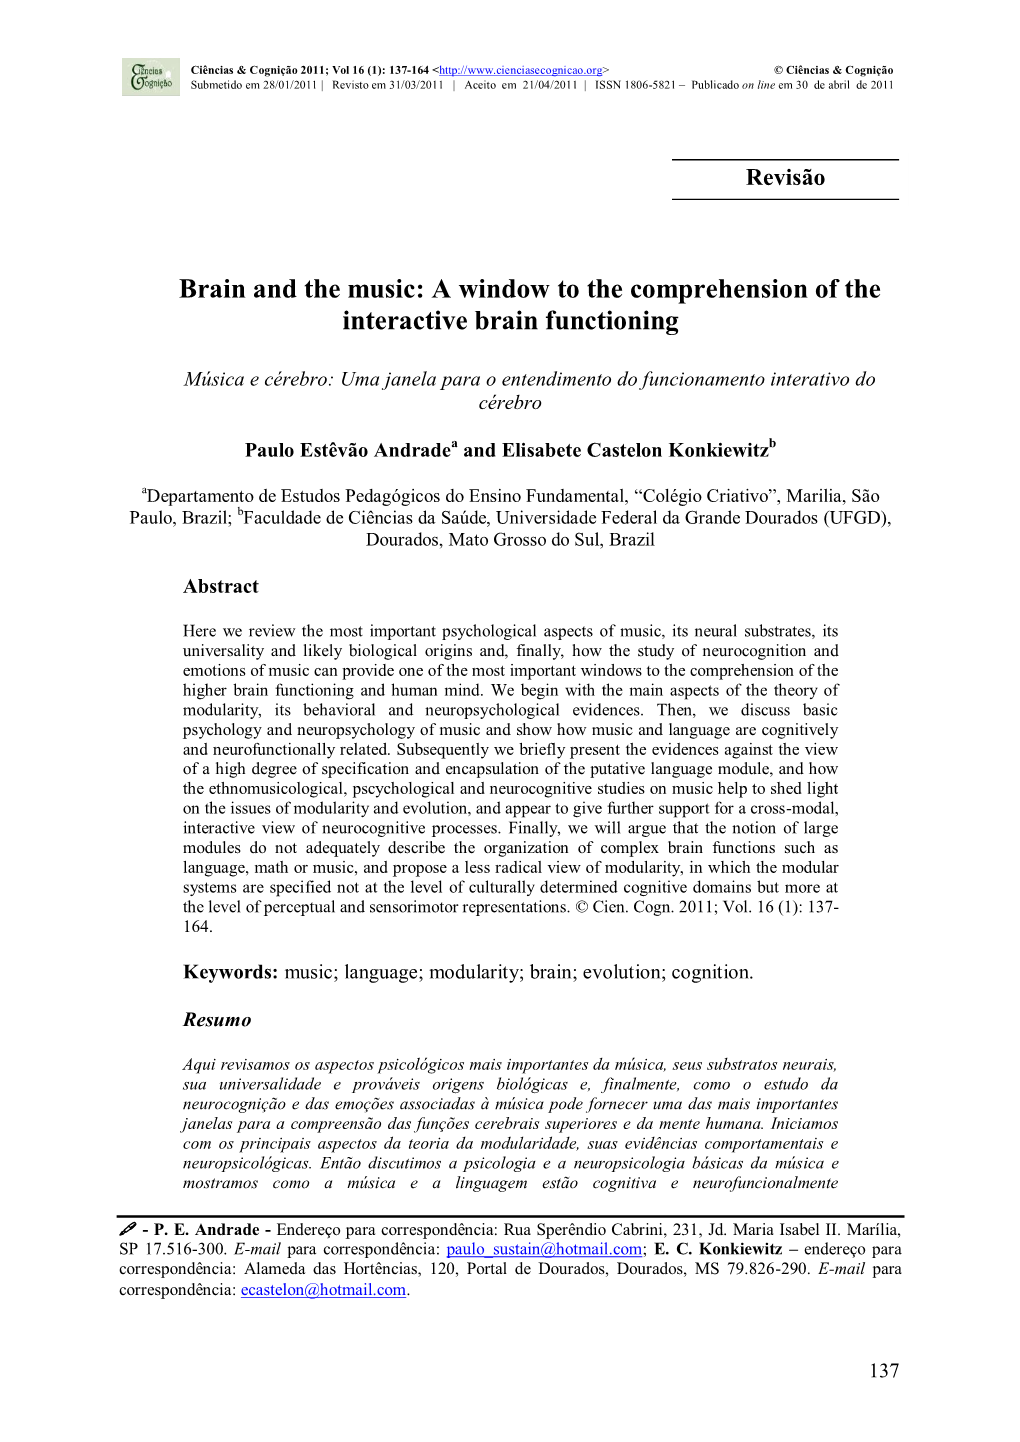 Brain and the Music: a Window to the Comprehension of the Interactive Brain Functioning